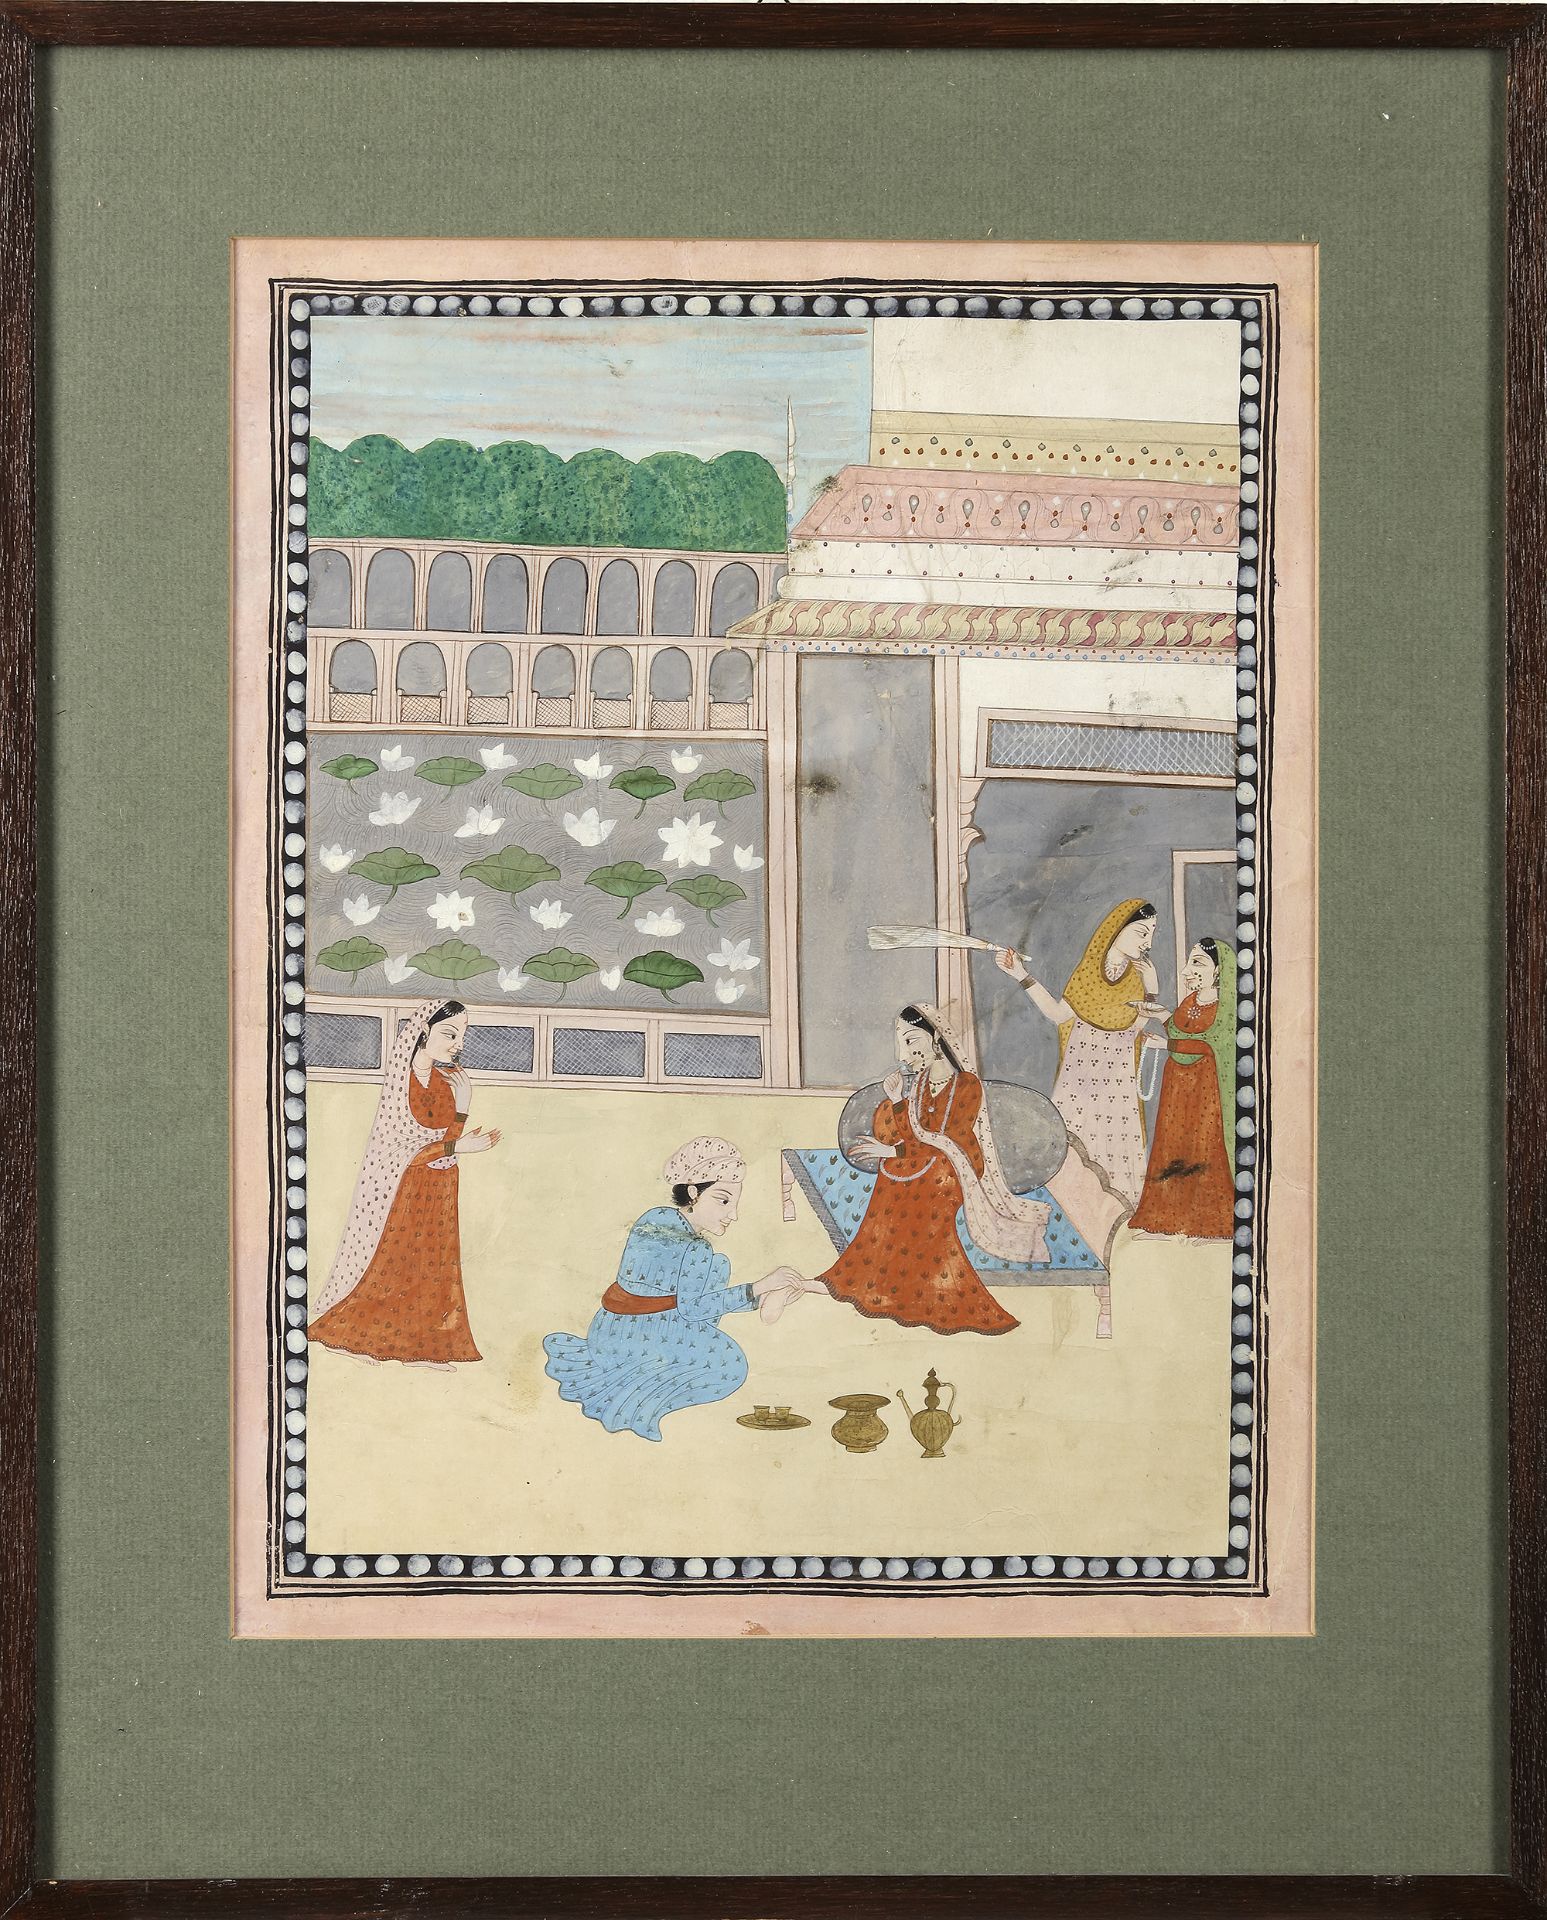 A PRINCESS IN A COURTYARD WITH ATTENDANTS, KANGRA NORTH INDIA, LATE 19TH CENTURY